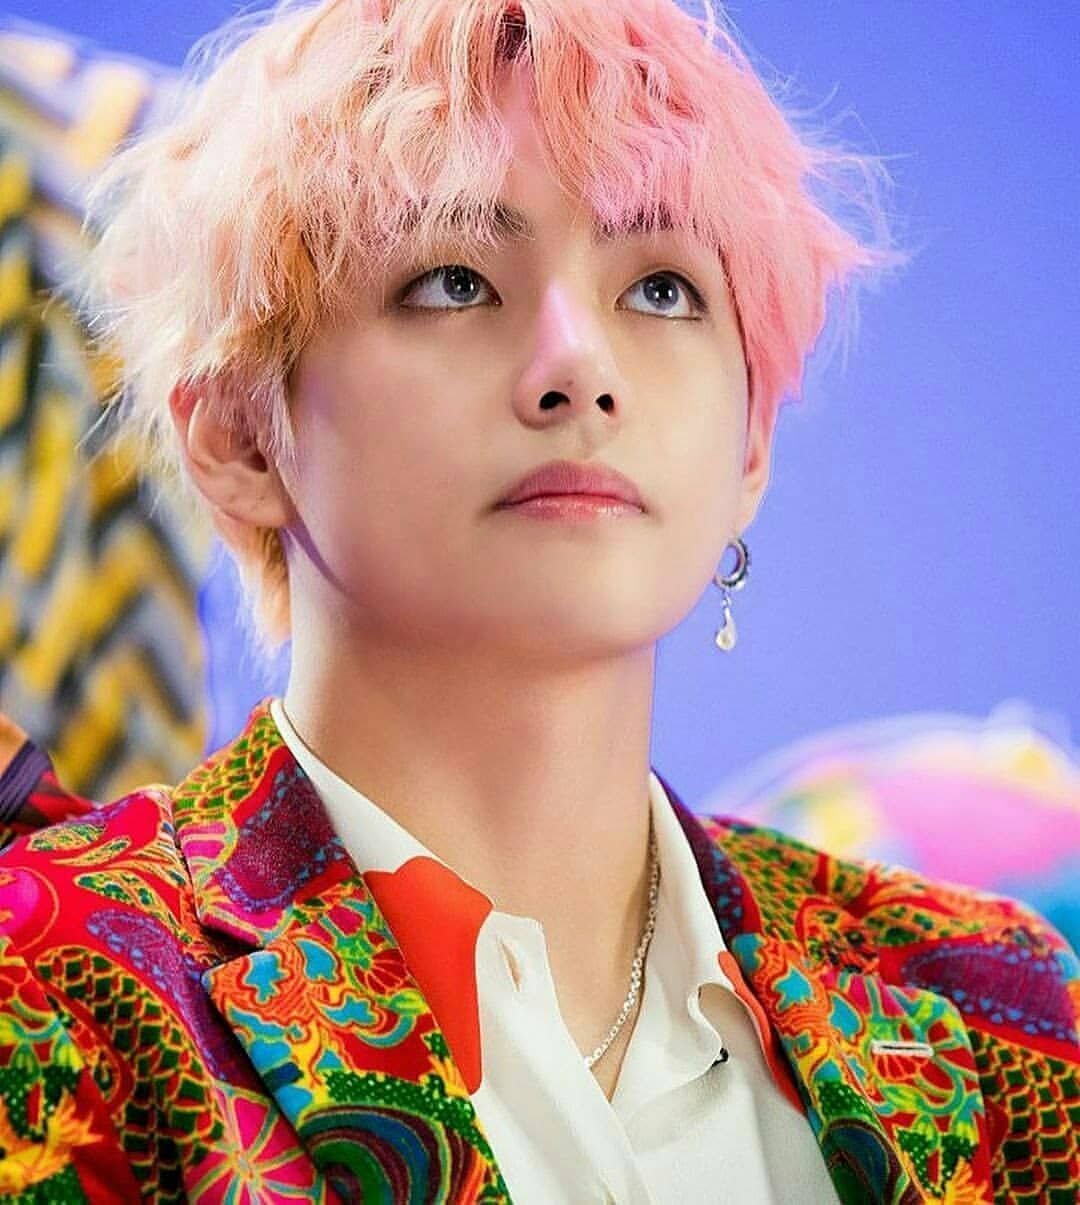 Here Are All The 20 Different Hair Colors And Styles That BTS’s V Has ...